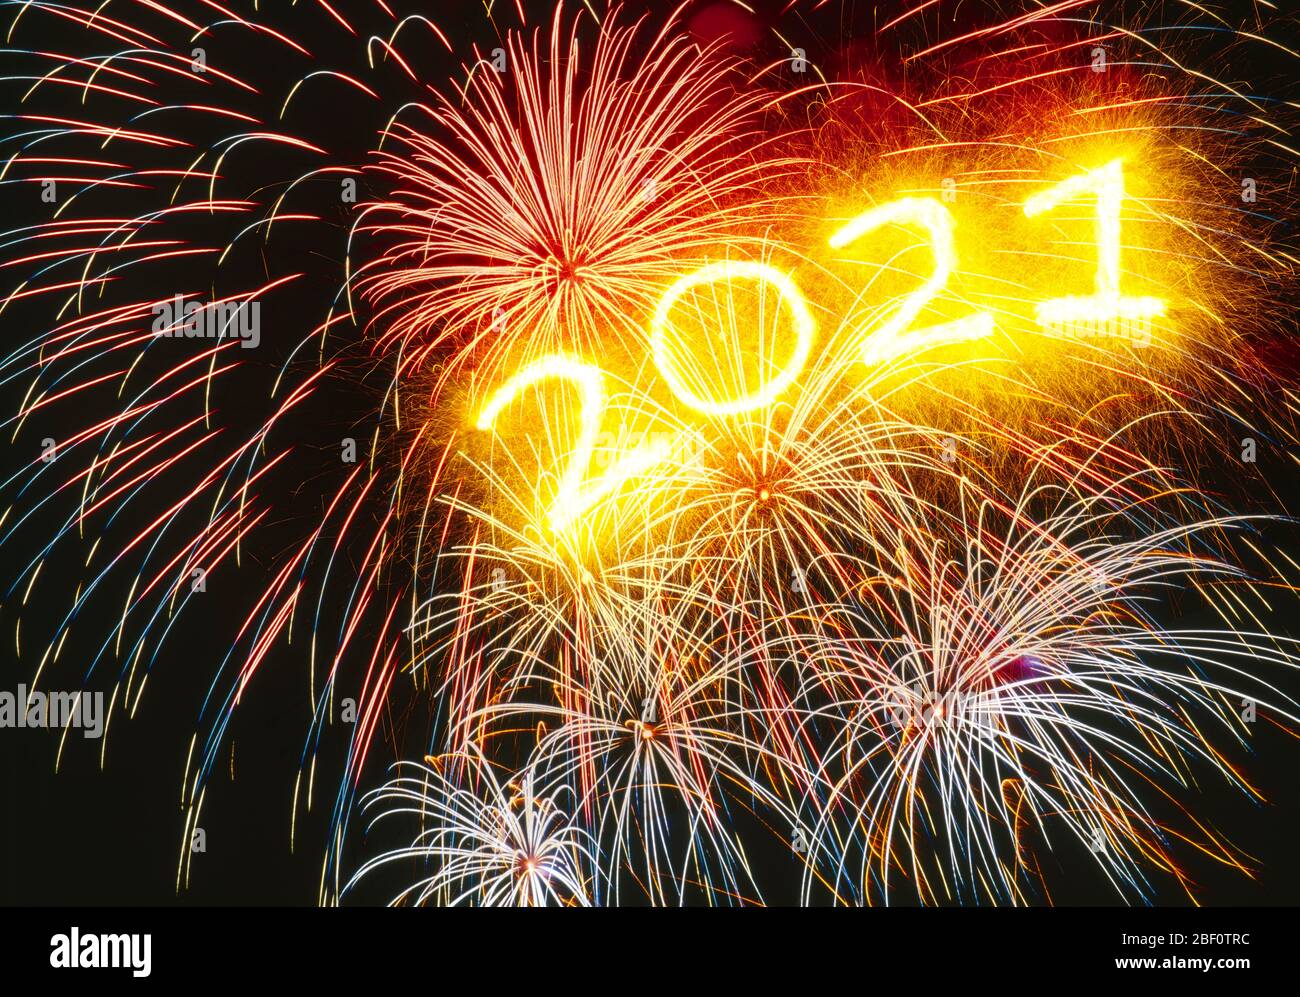 PHOTOMONTAGE, fireworks with year 2021 Stock Photo